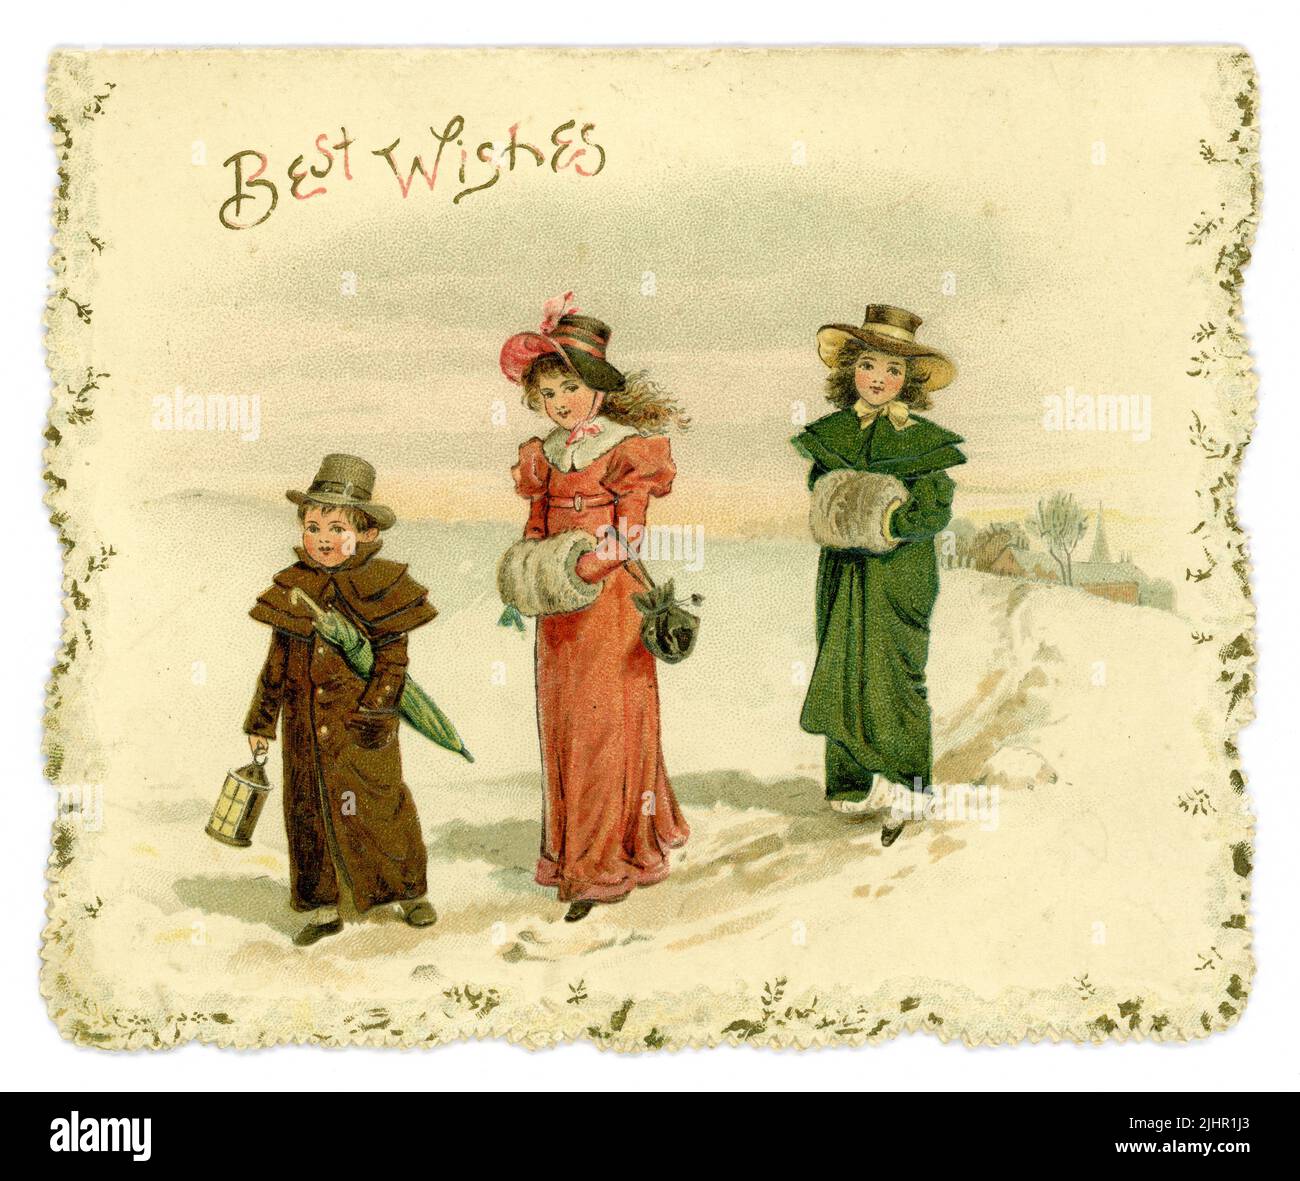 Original Edwardian era Christmas Greetings card,  Victorian Christmas card. greeting is 'best wishes'. The children are dressed in Regency period style (Regency was 1811-1820) clothes walking in the snow, similar online postcard sent in US. dated 1904 Stock Photo